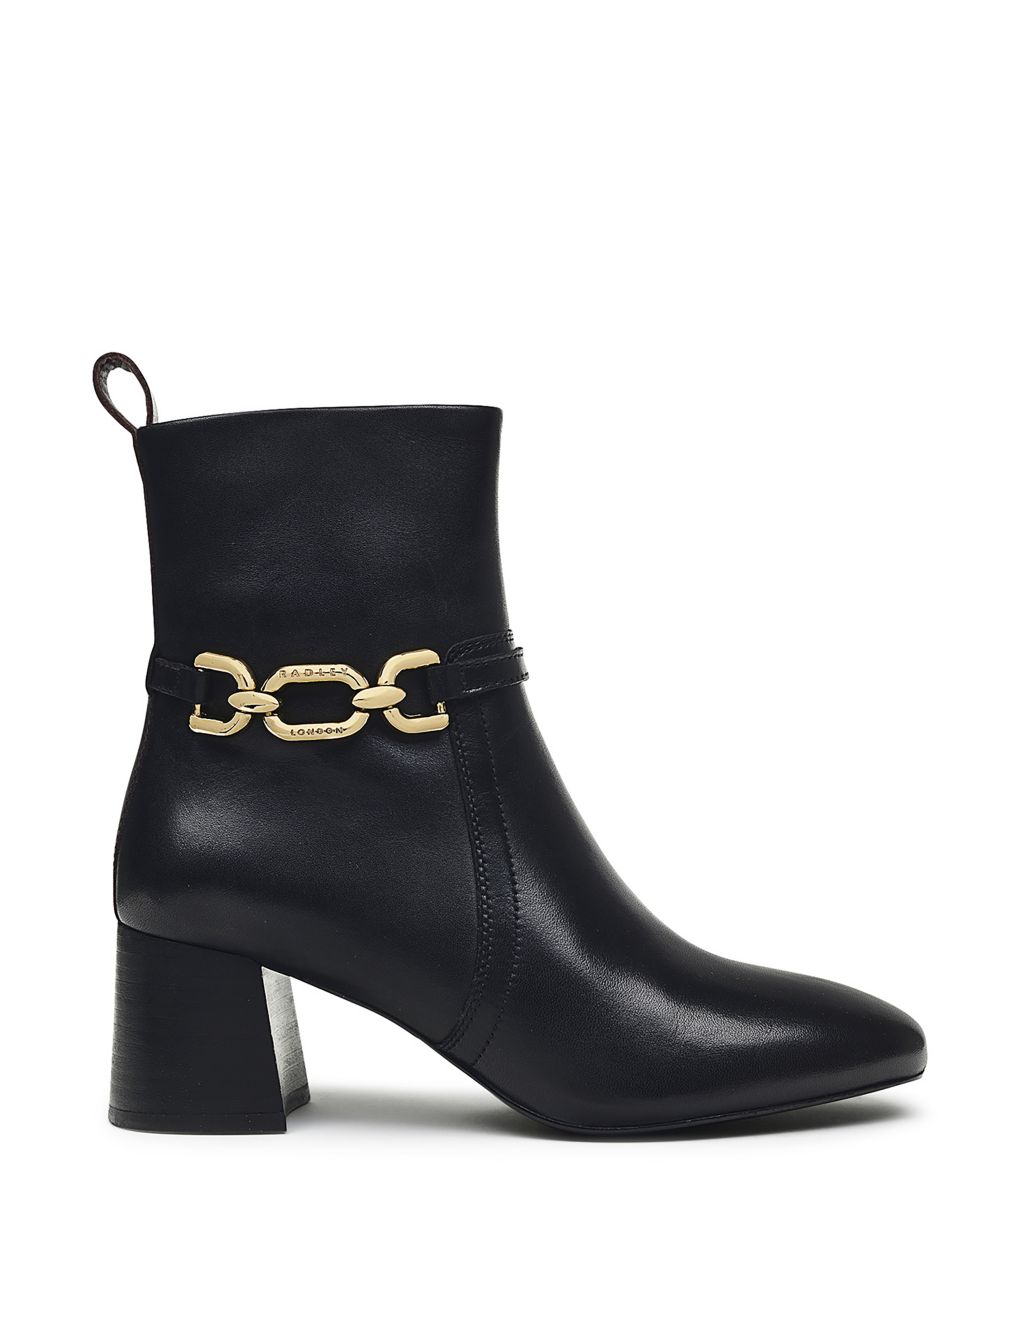 Leather Chunky Block Heel Ankle Boots image 1